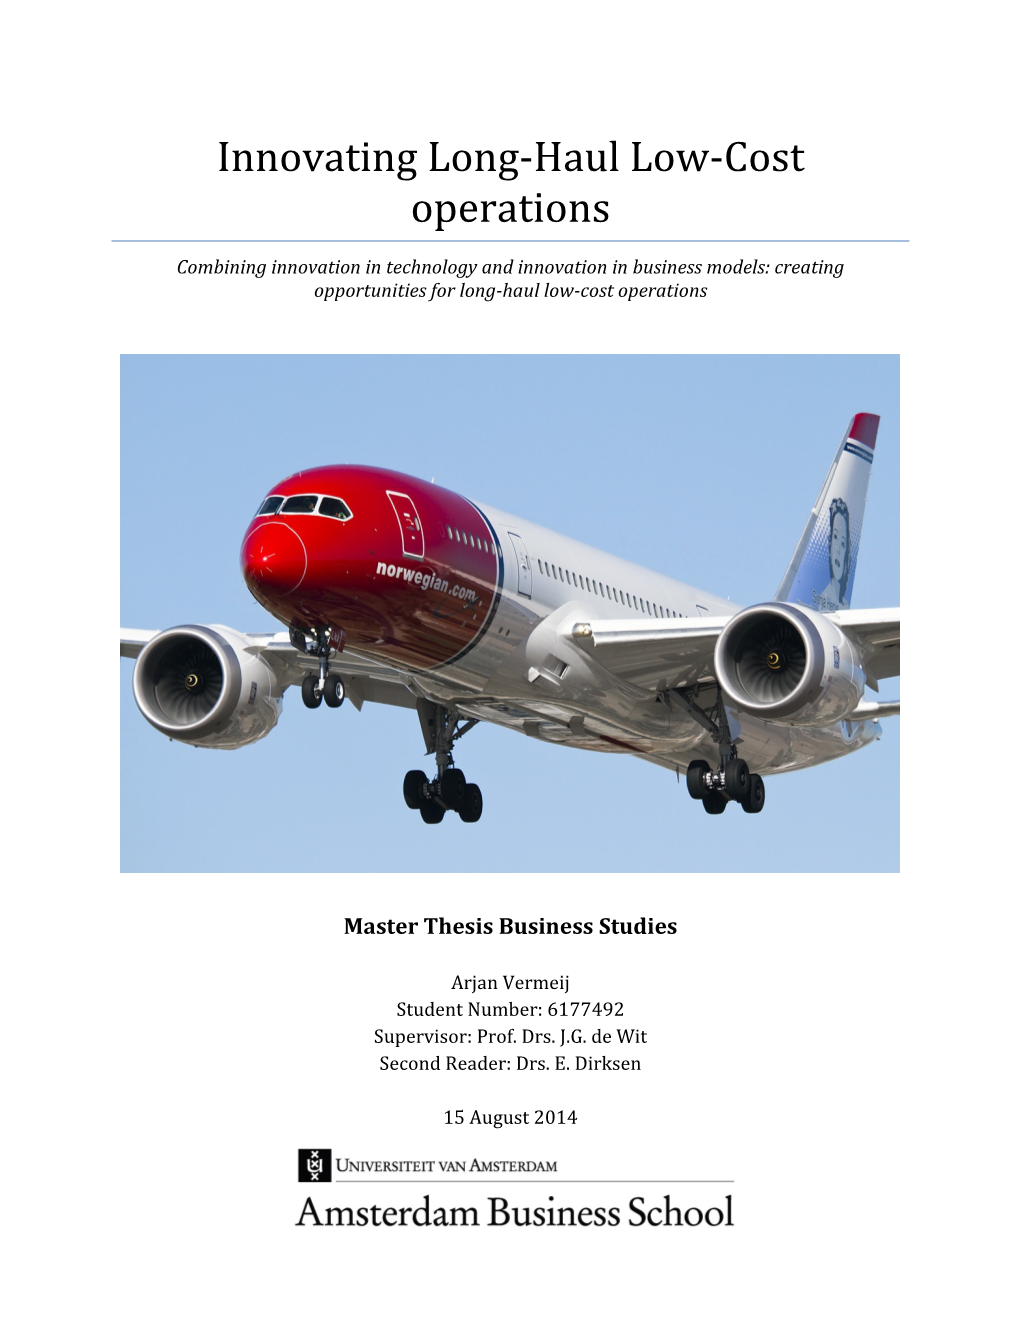 Innovating Long-Haul Low-Cost Operations